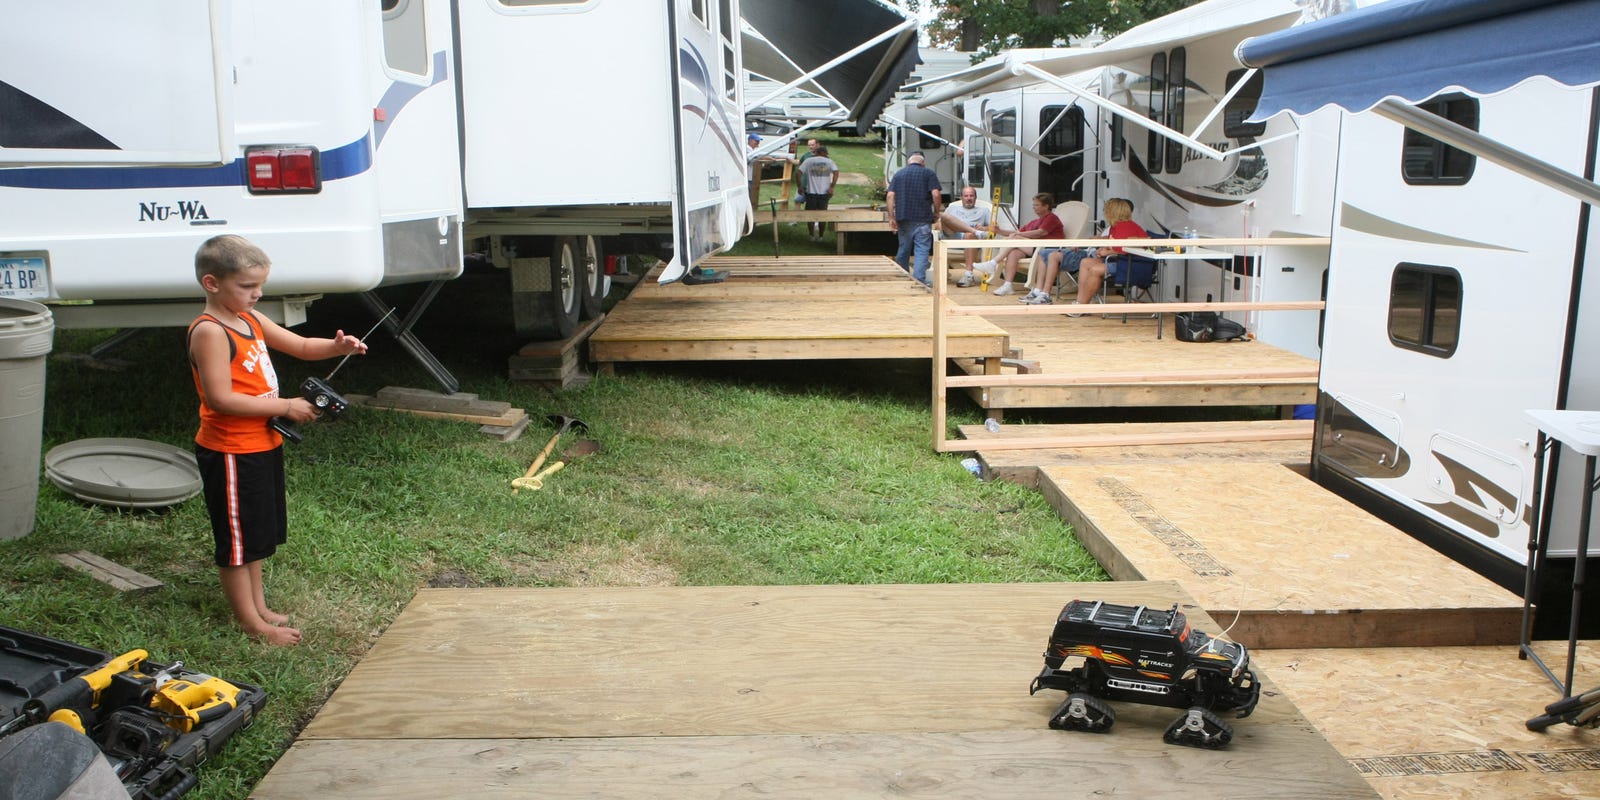 Iowa State Fair Campgrounds to open for season